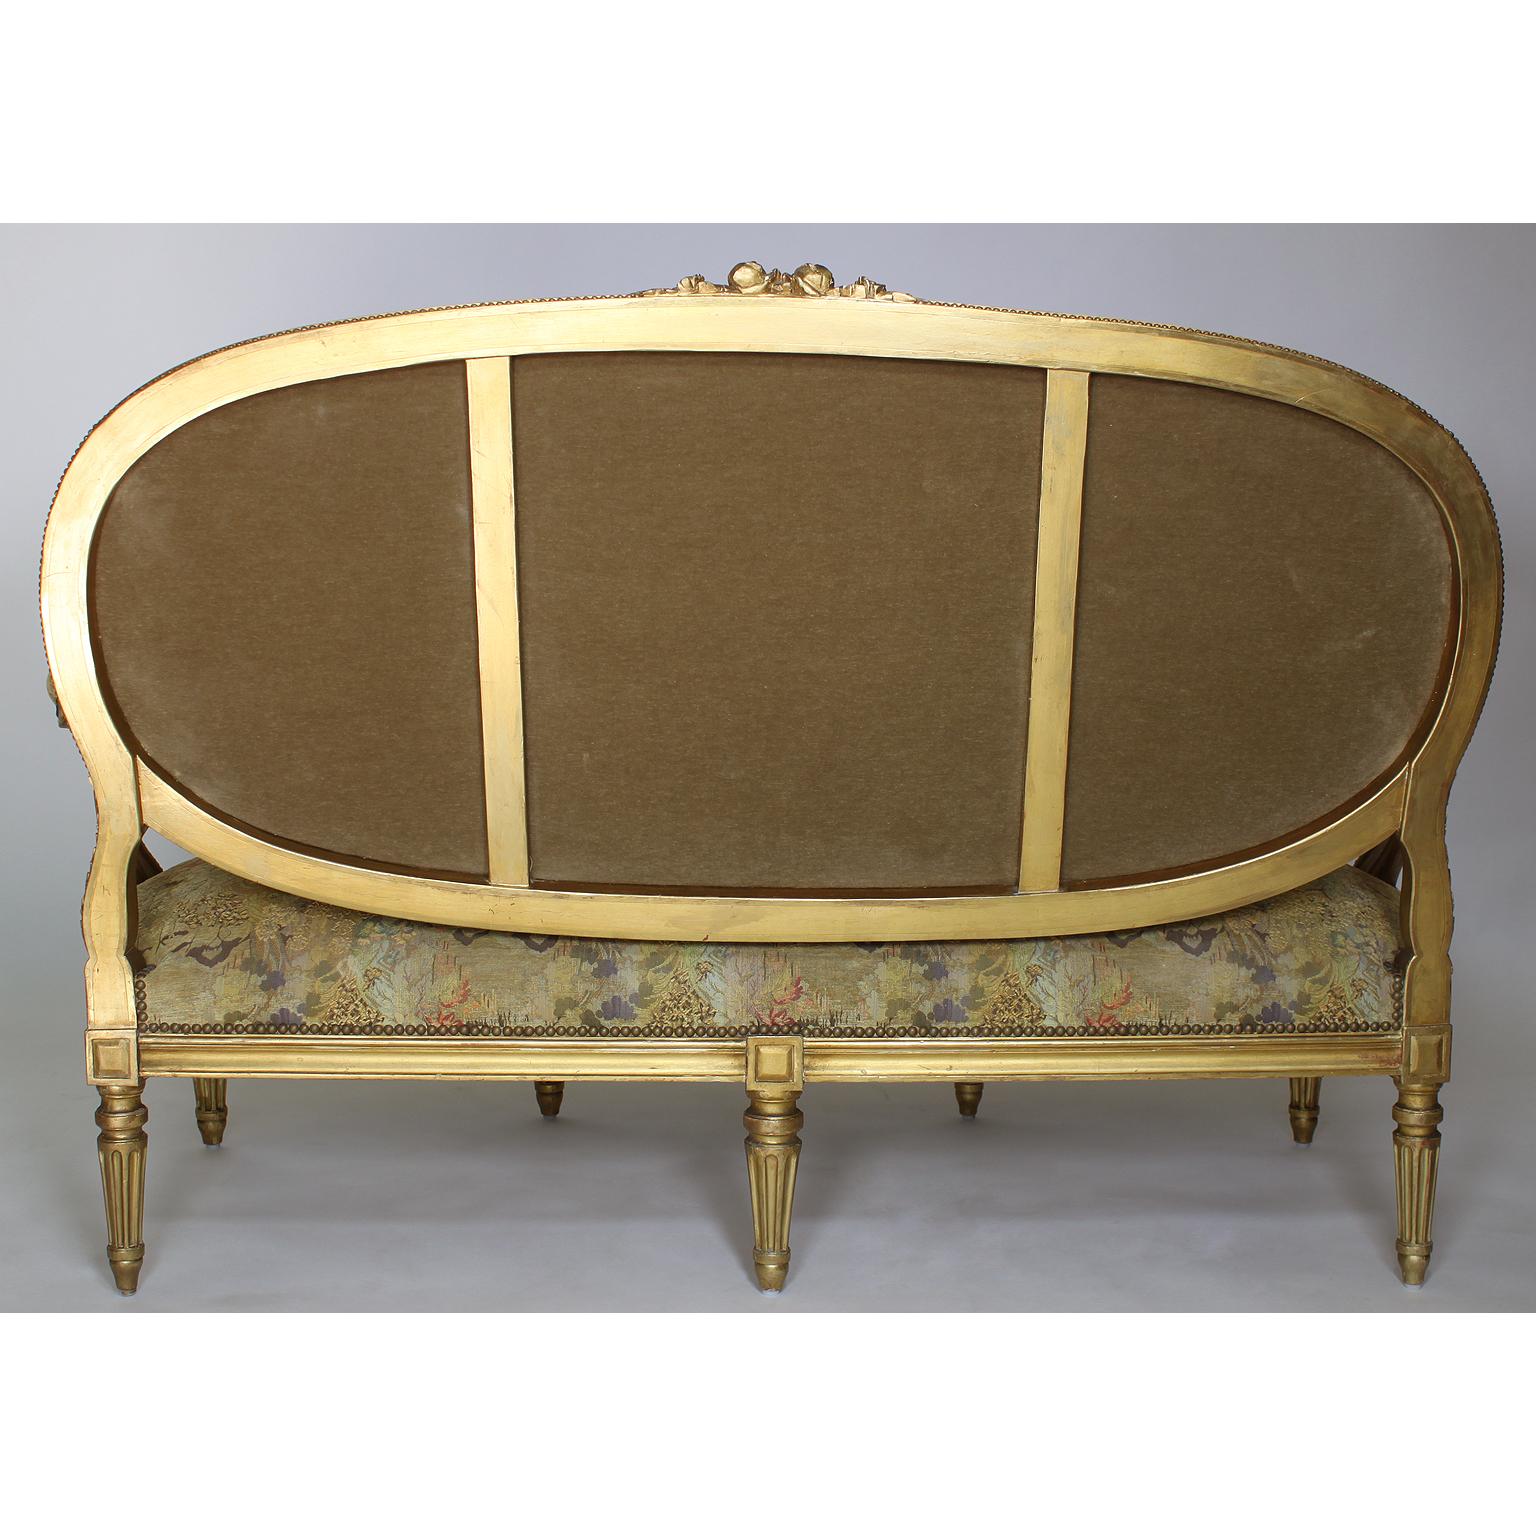 Fine French 19th Century Louis XVI Style Giltwood Carved Five-Piece Salon Suite For Sale 2